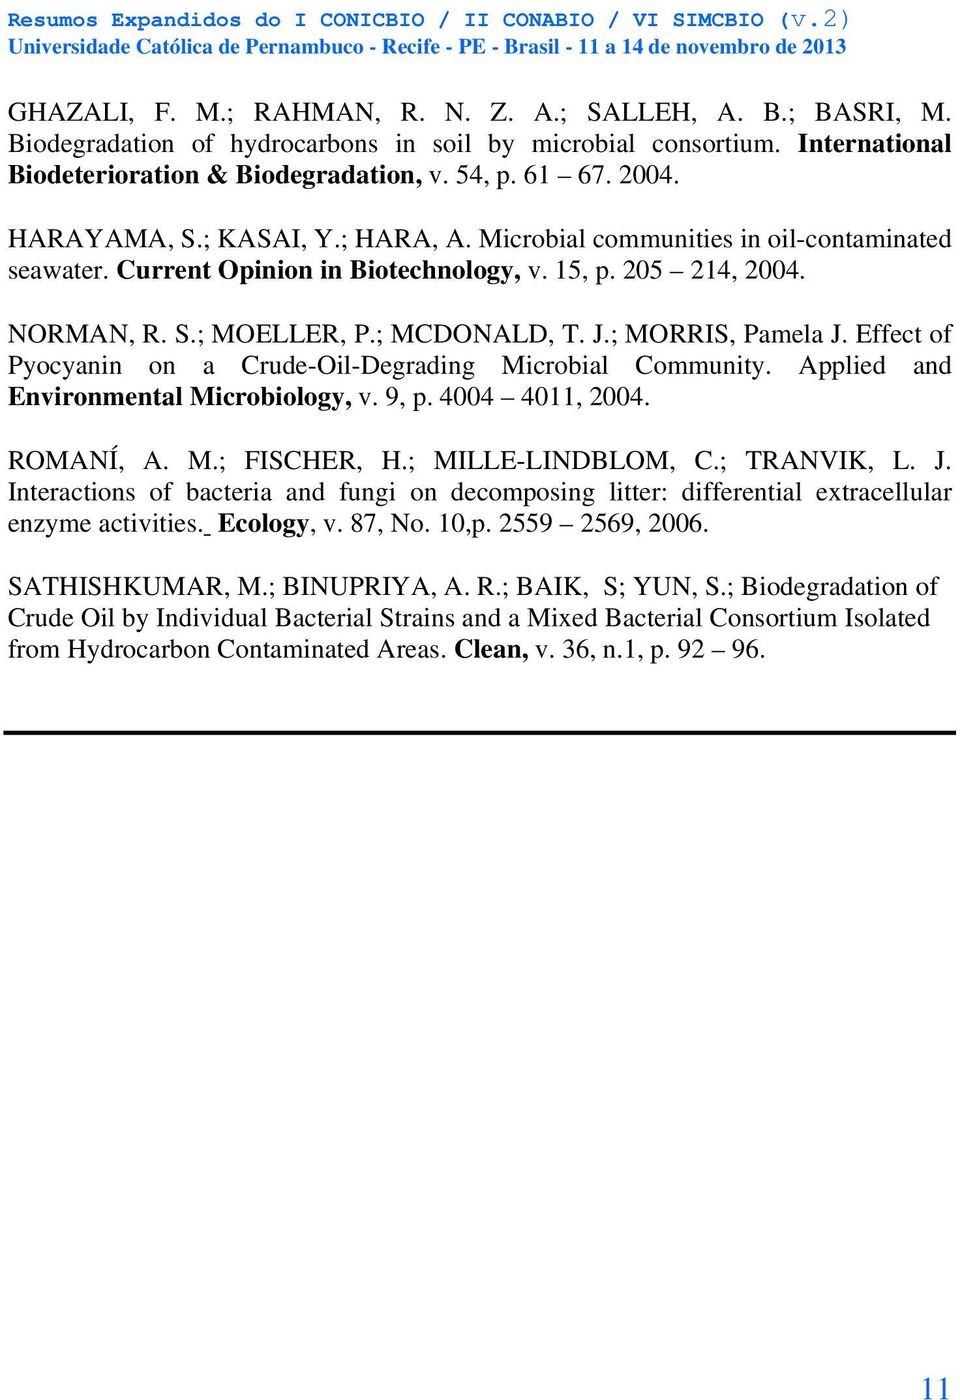 ; MORRIS, Pamela J. Effect of Pyocyanin on a Crude-Oil-Degrading Microbial Community. Applied and Environmental Microbiology, v. 9, p. 4004 4011, 2004. ROMANÍ, A. M.; FISCHER, H.; MILLE-LINDBLOM, C.